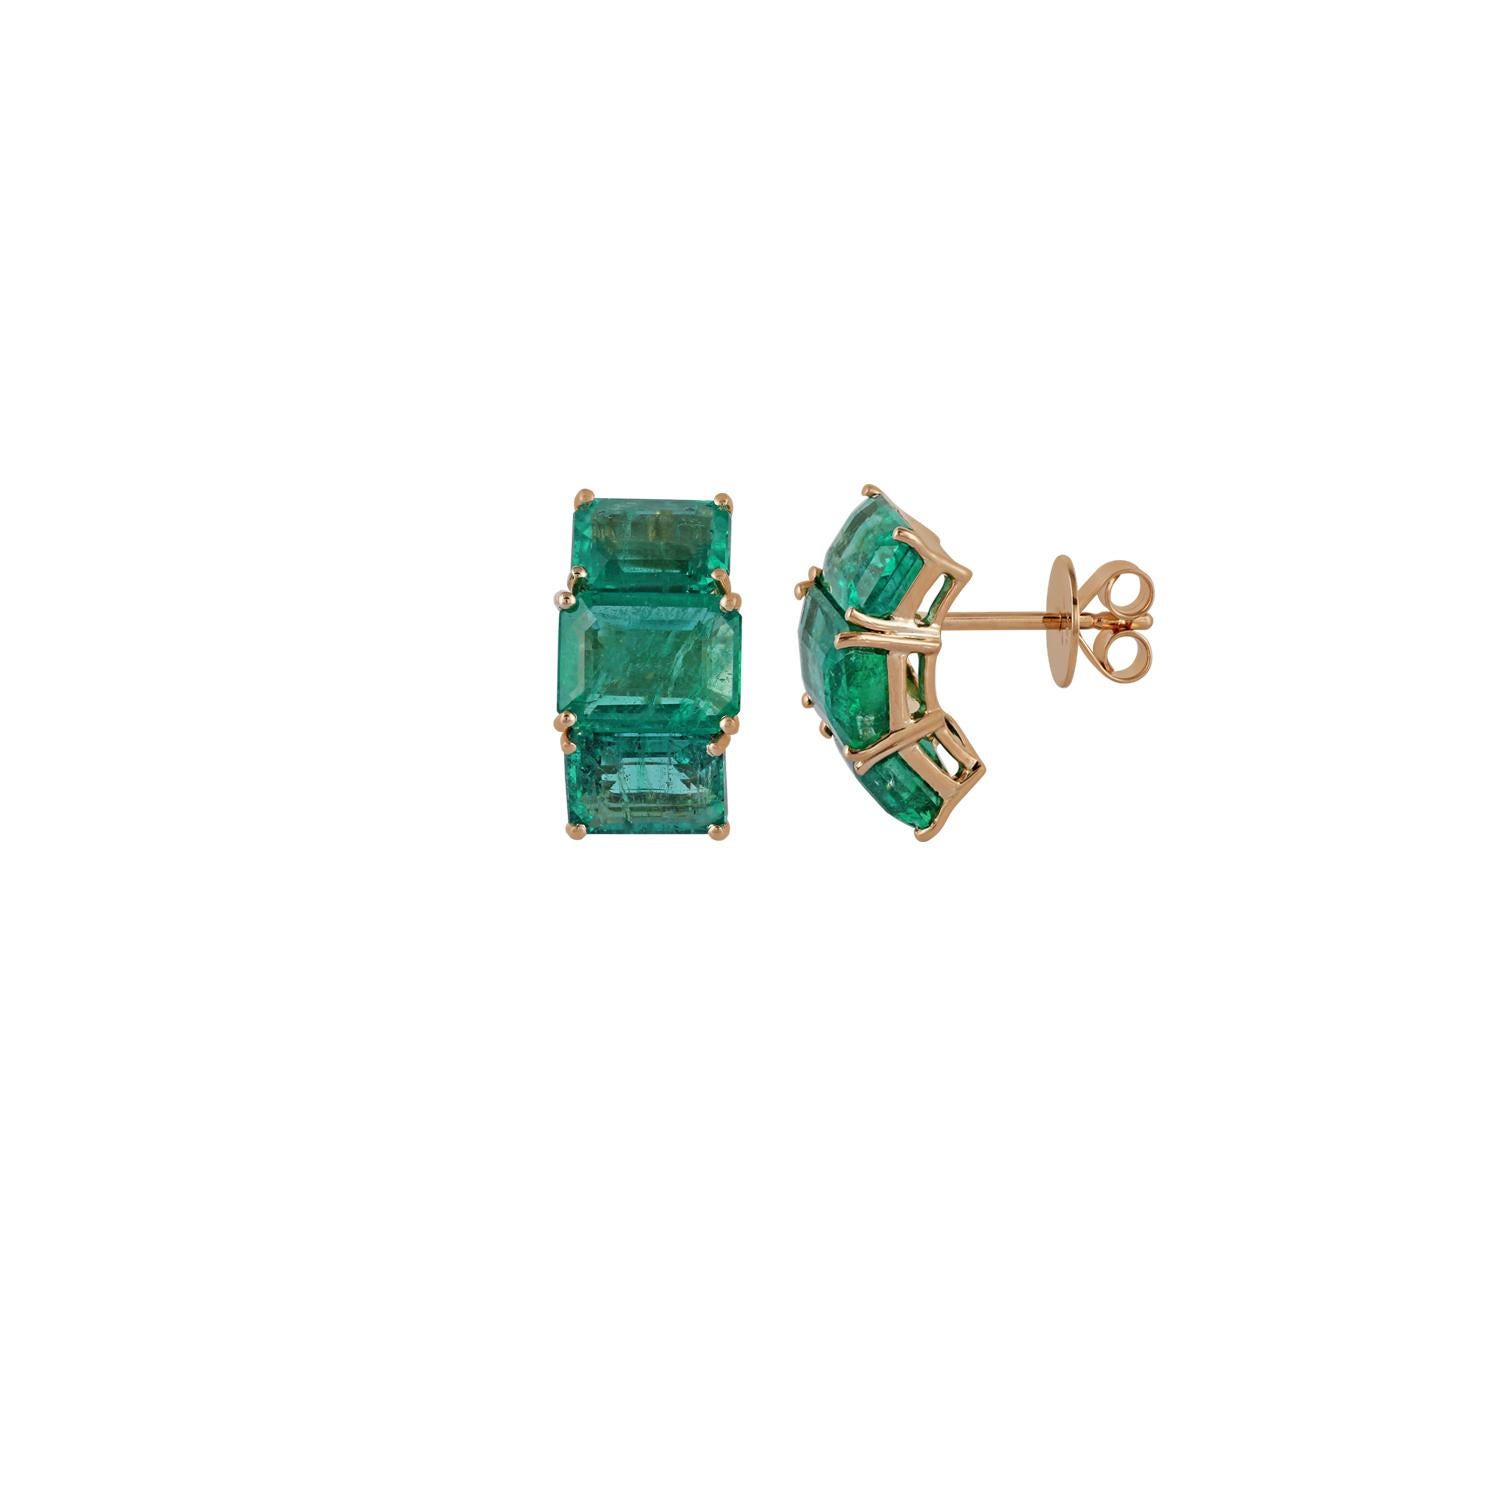 Contemporary Emerald Earrings Studded in 18 Karat Yellow Gold